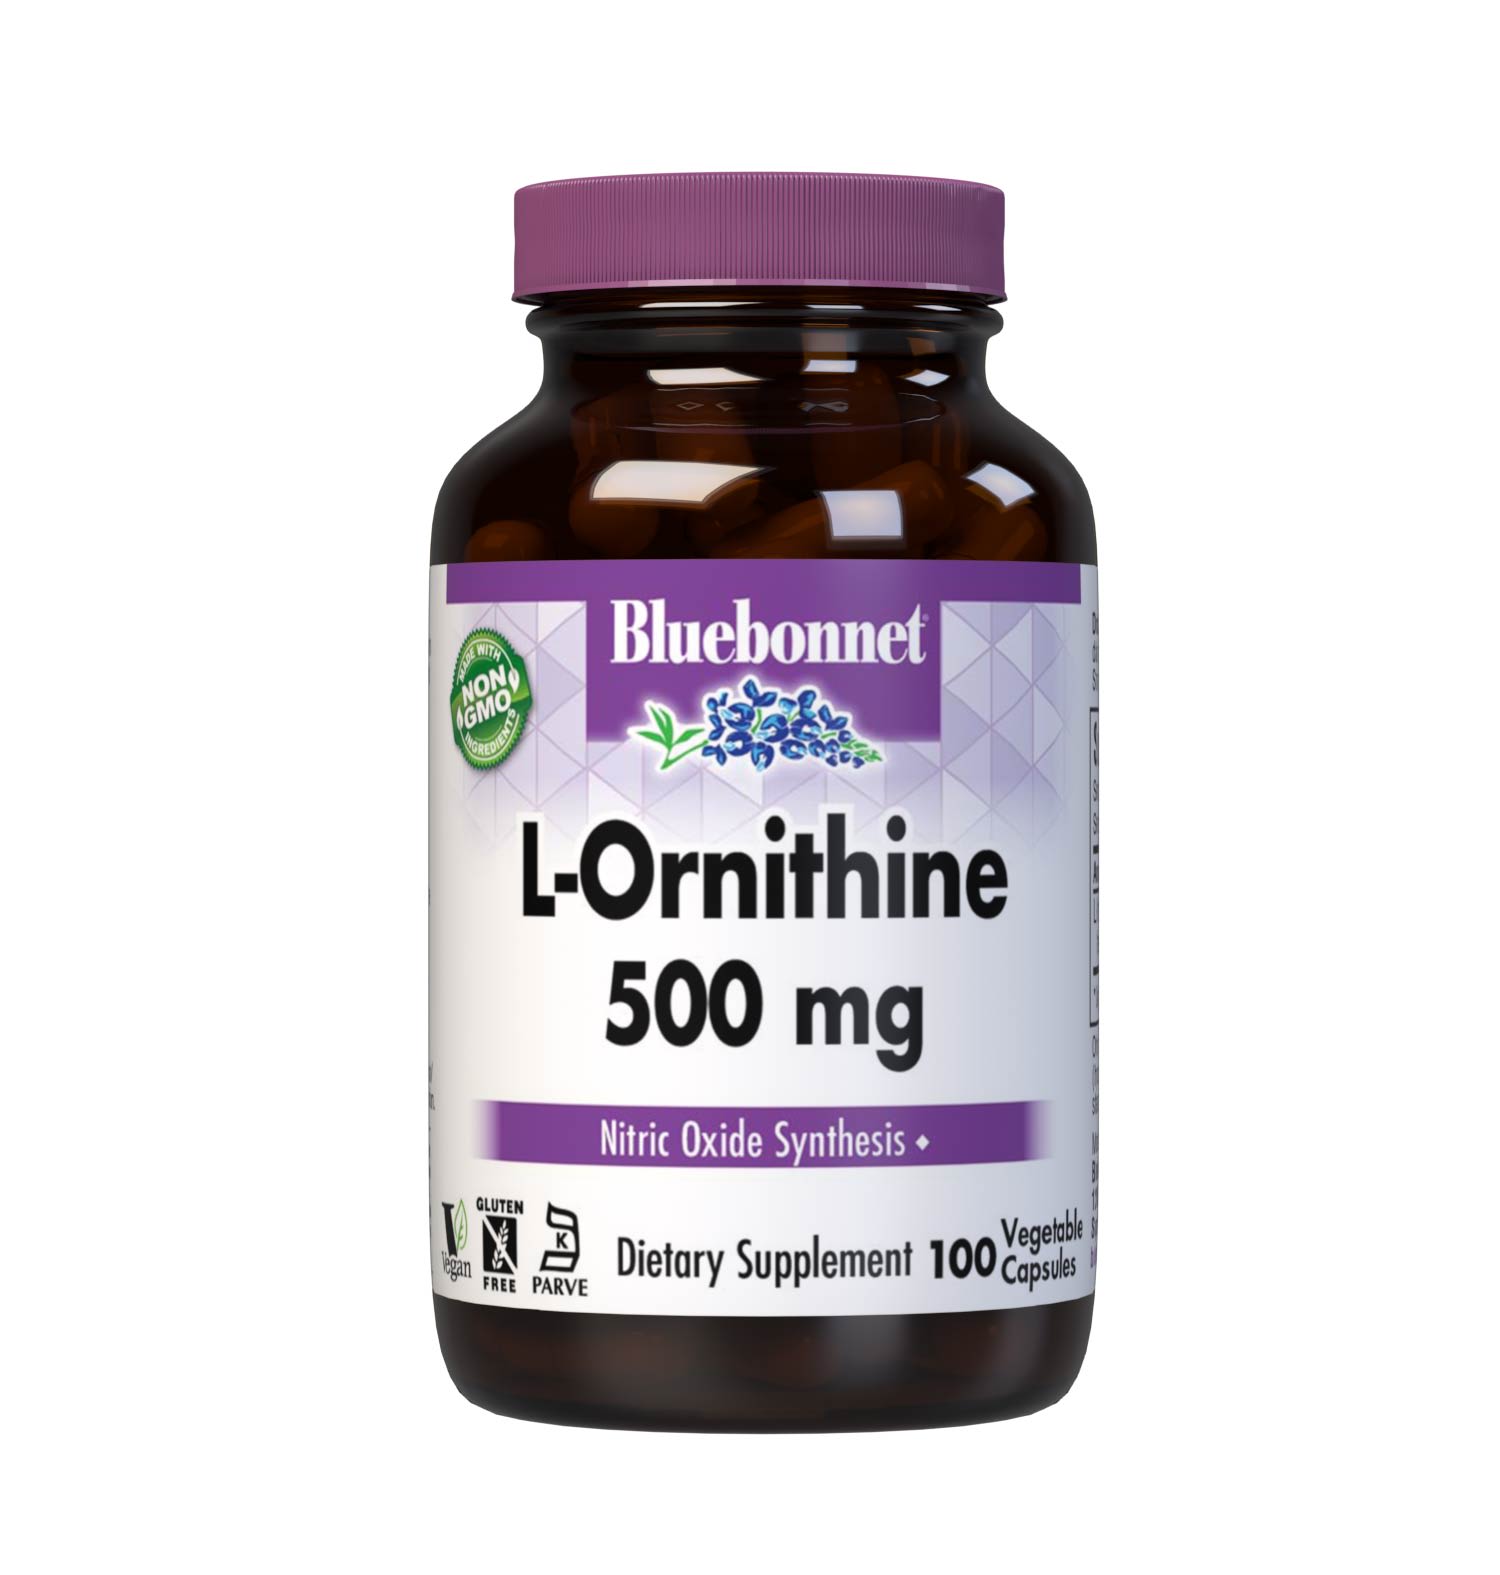 Bluebonnet’s L-Ornithine 500 mg 100 Vegetable Capsules provide the pharmaceutical grade, free-form amino acid L-ornithine HCI in its crystalline form. #size_100 count